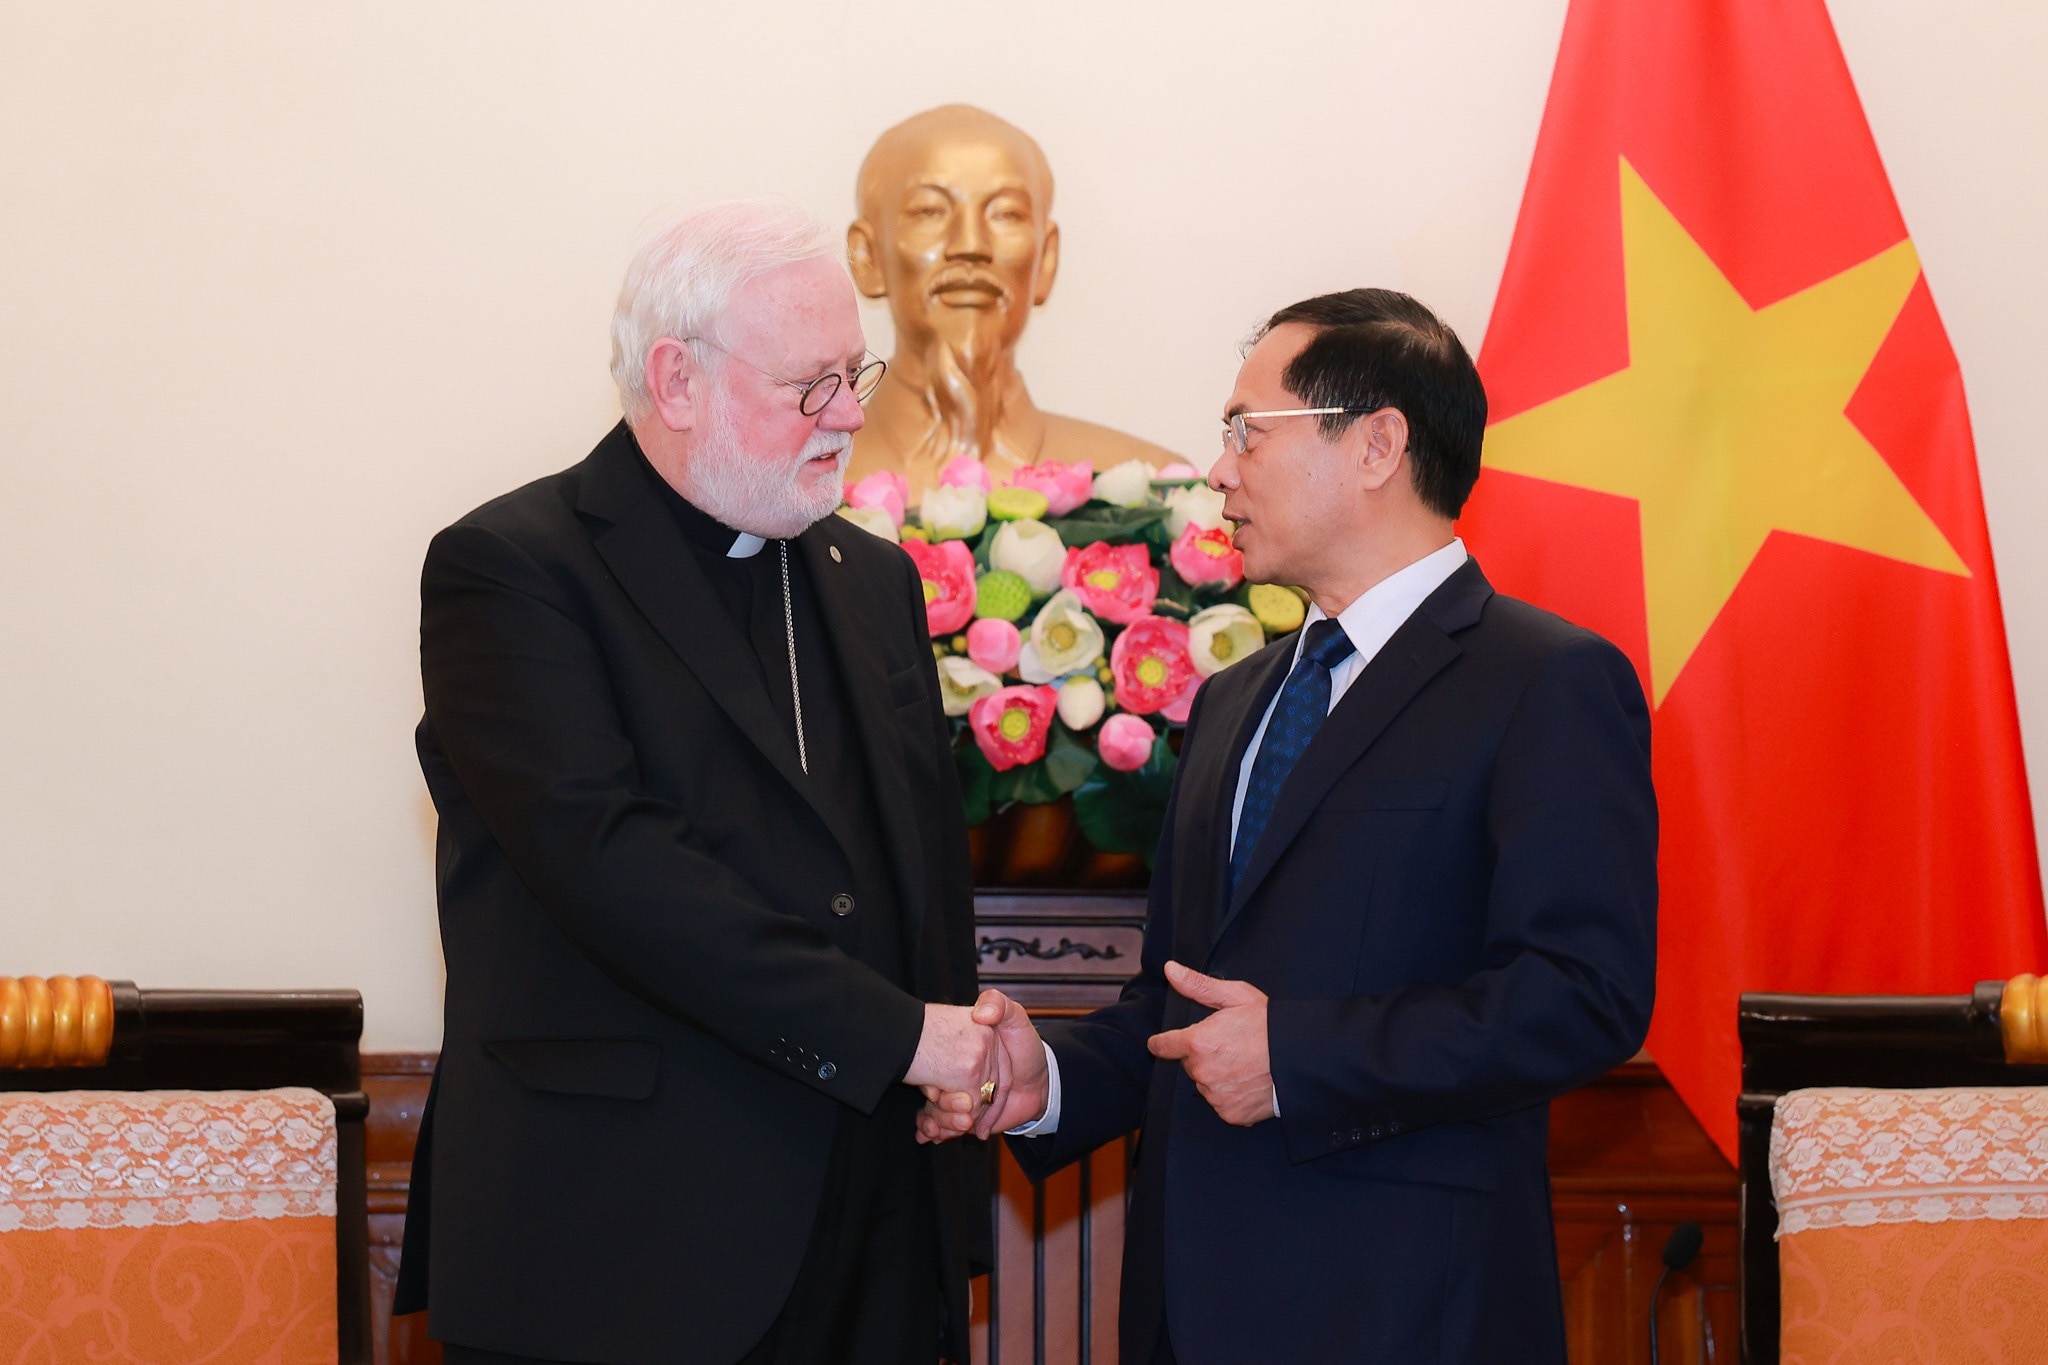 Minister Bui Thanh Son believes that the visit will contribute to promoting good relations between Vietnam and the Vatican. Photo: Hai Nguyen